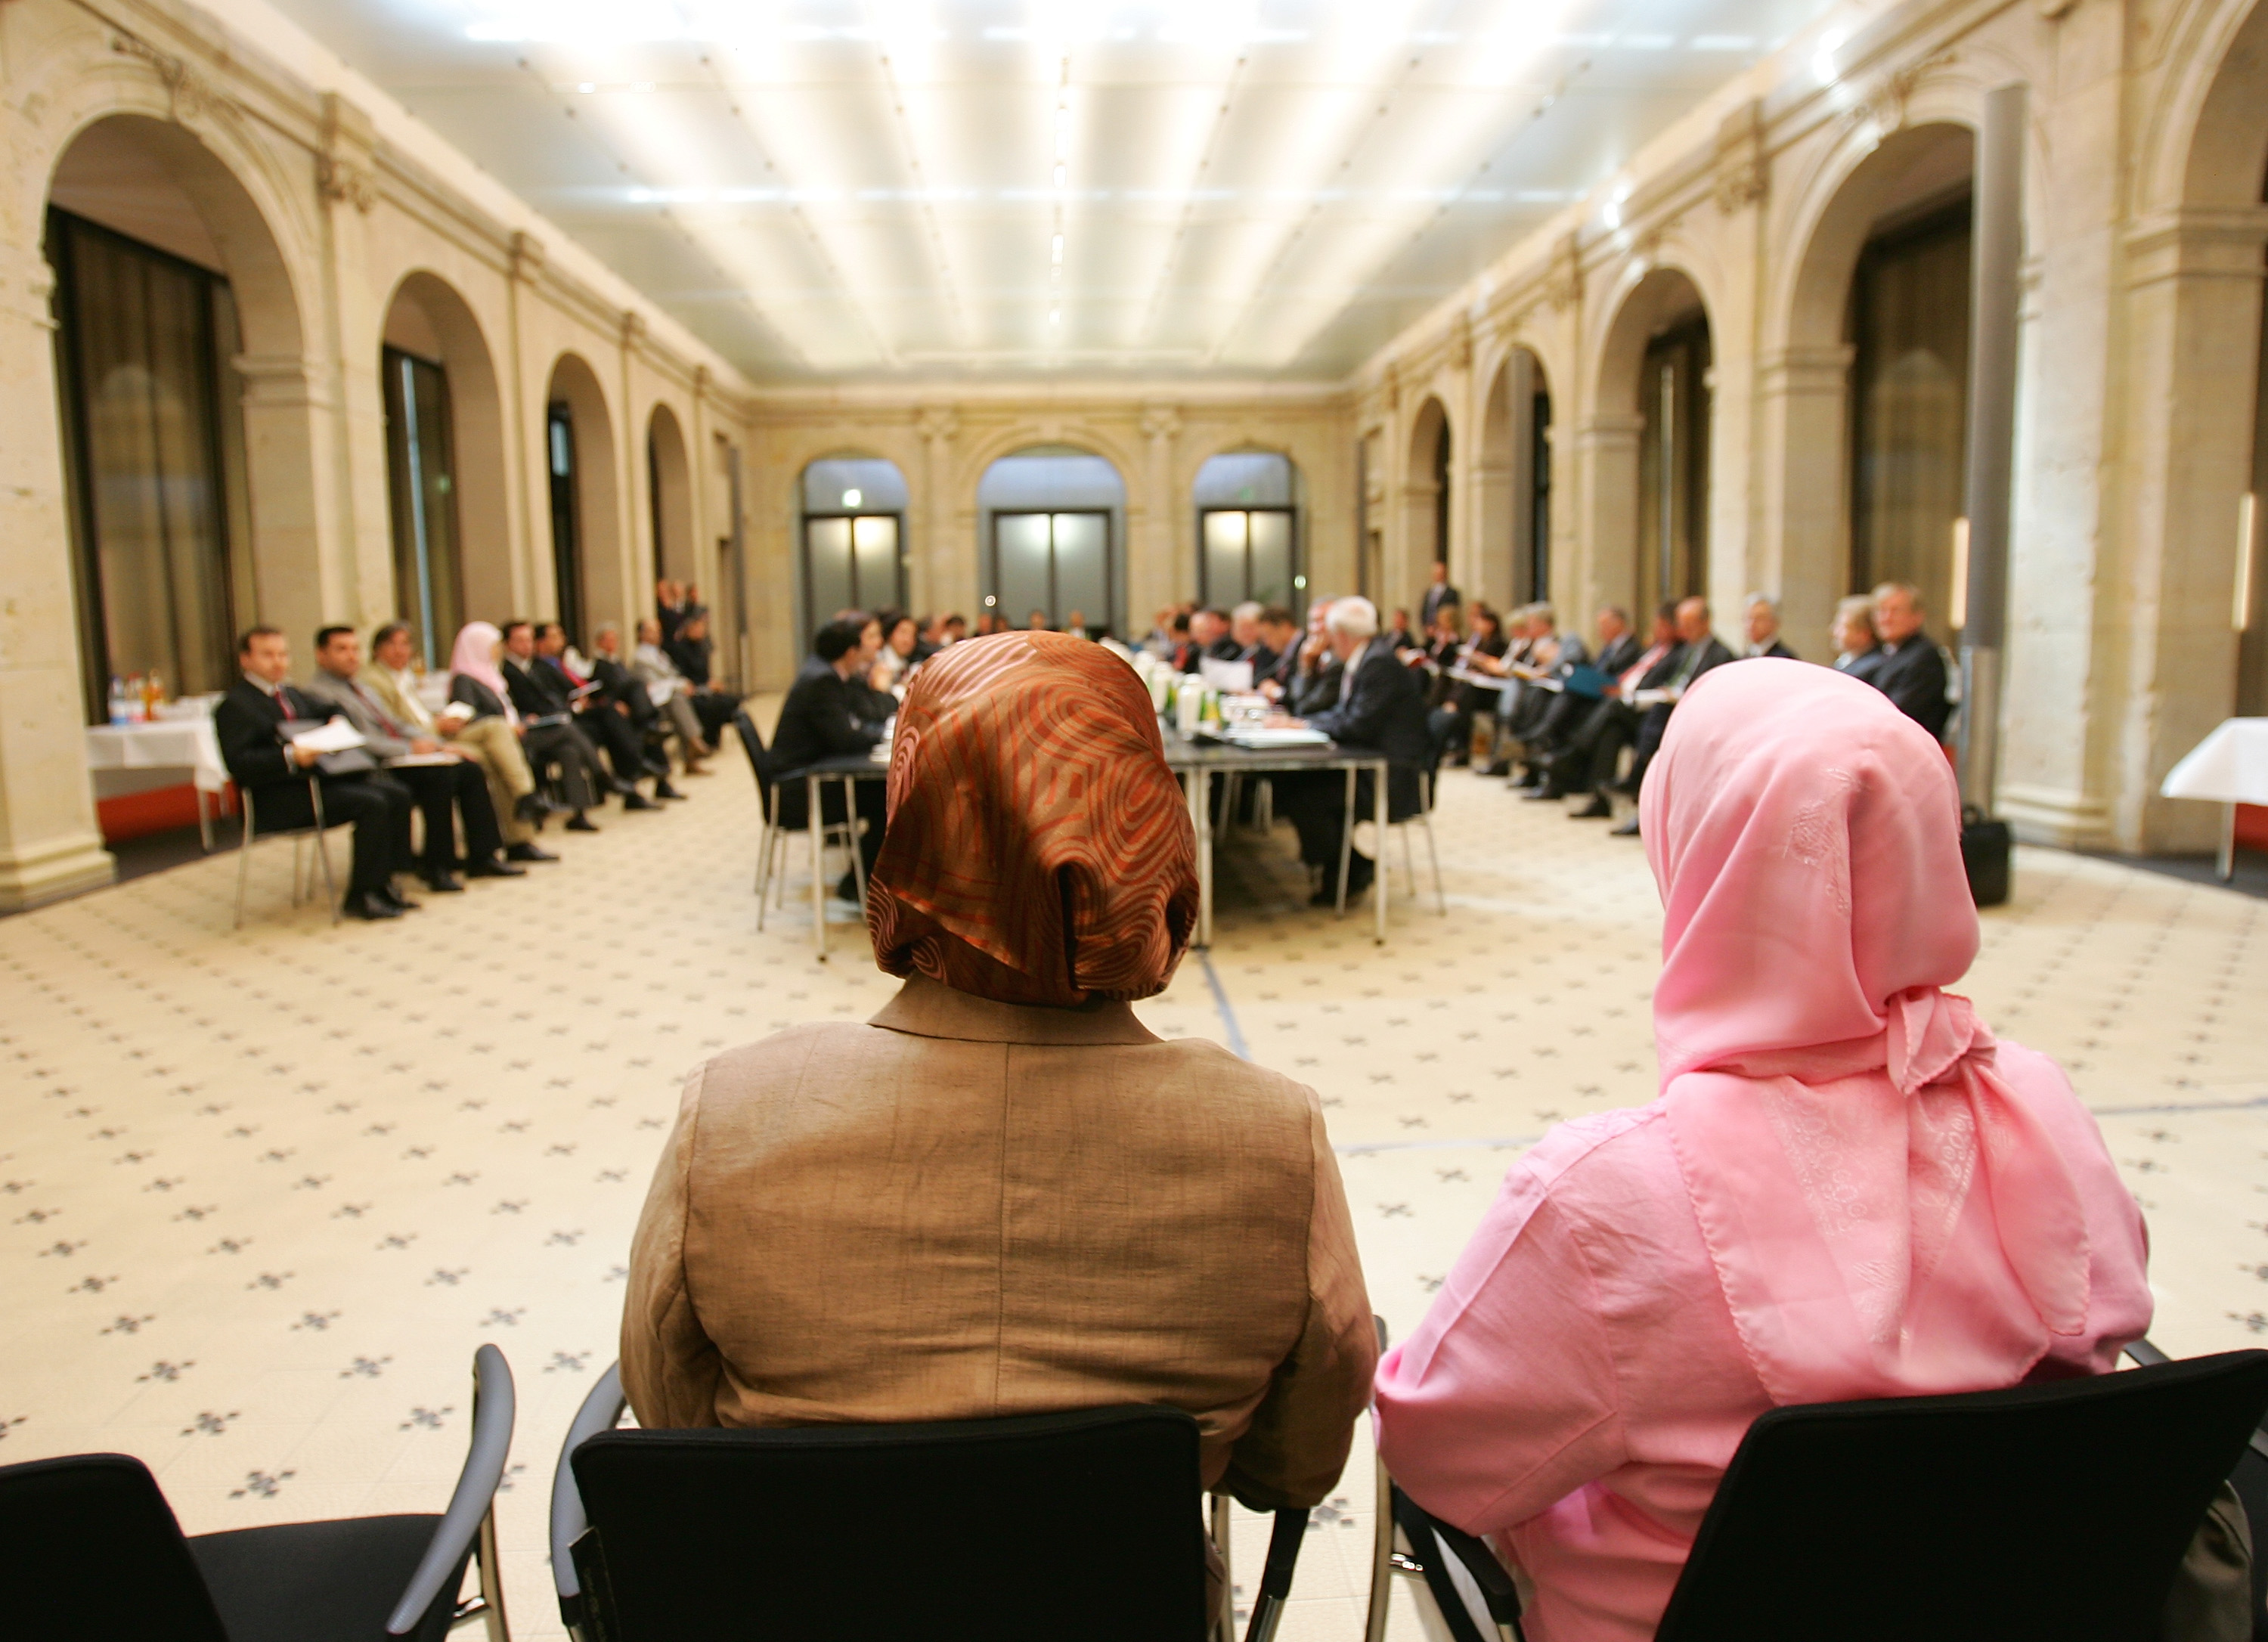 BERLIN - MAY 02: Two Muslim women wearing headscarfs, follow the second conference on Islam on May 2, 2007 in Berlin, Germany. Leading representatives of Germany's three million-strong Muslim community met with German politicians at the conference to discuss topics such as integration, rights and security. (Photo by Andreas Rentz/Getty Images)